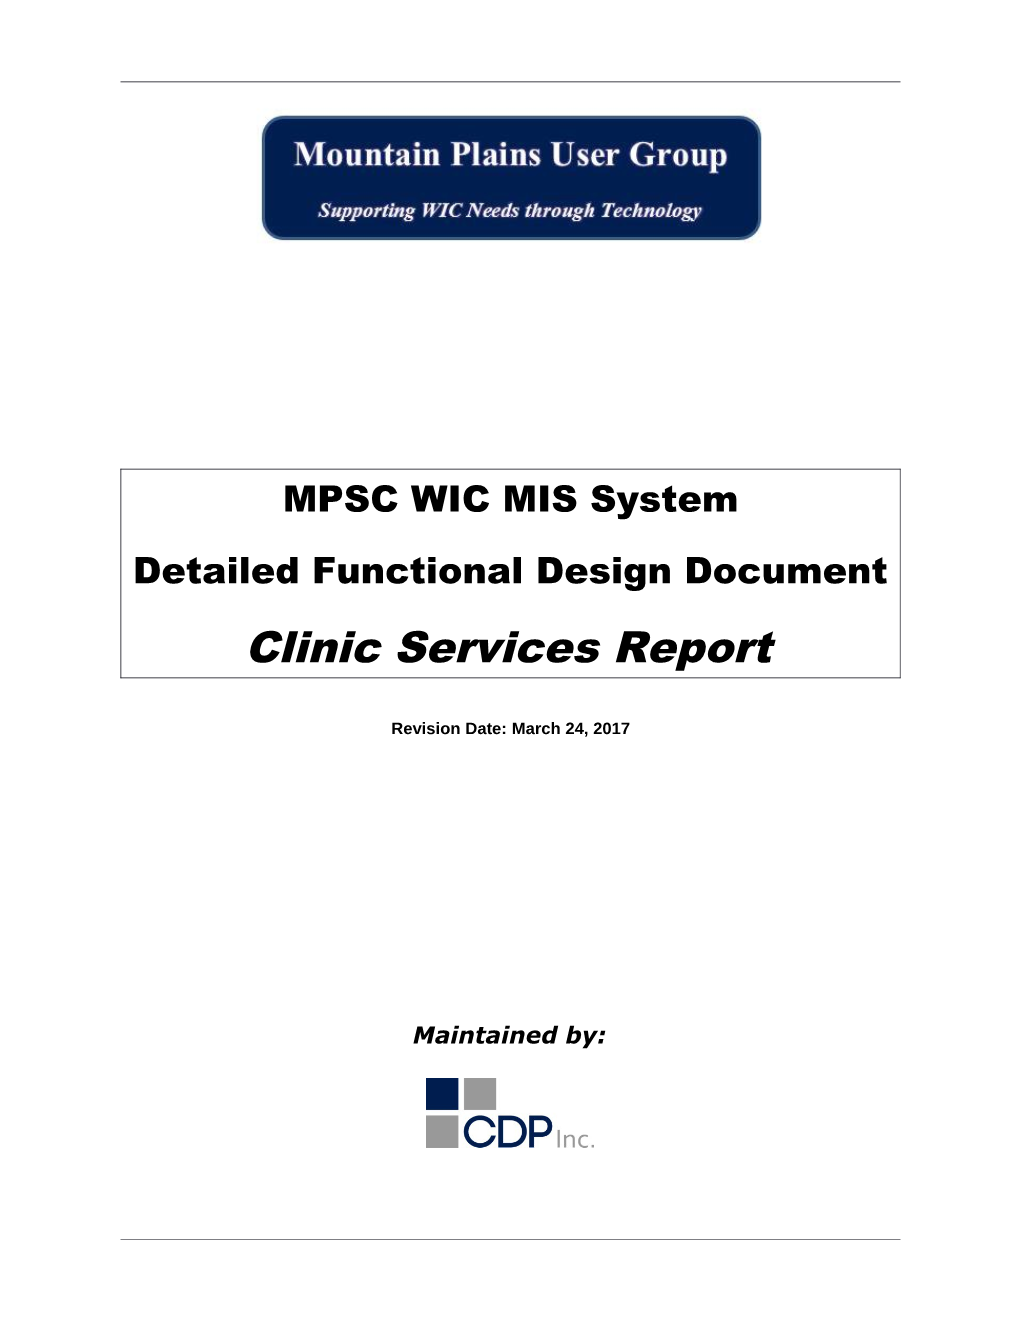 Clinic Services Report